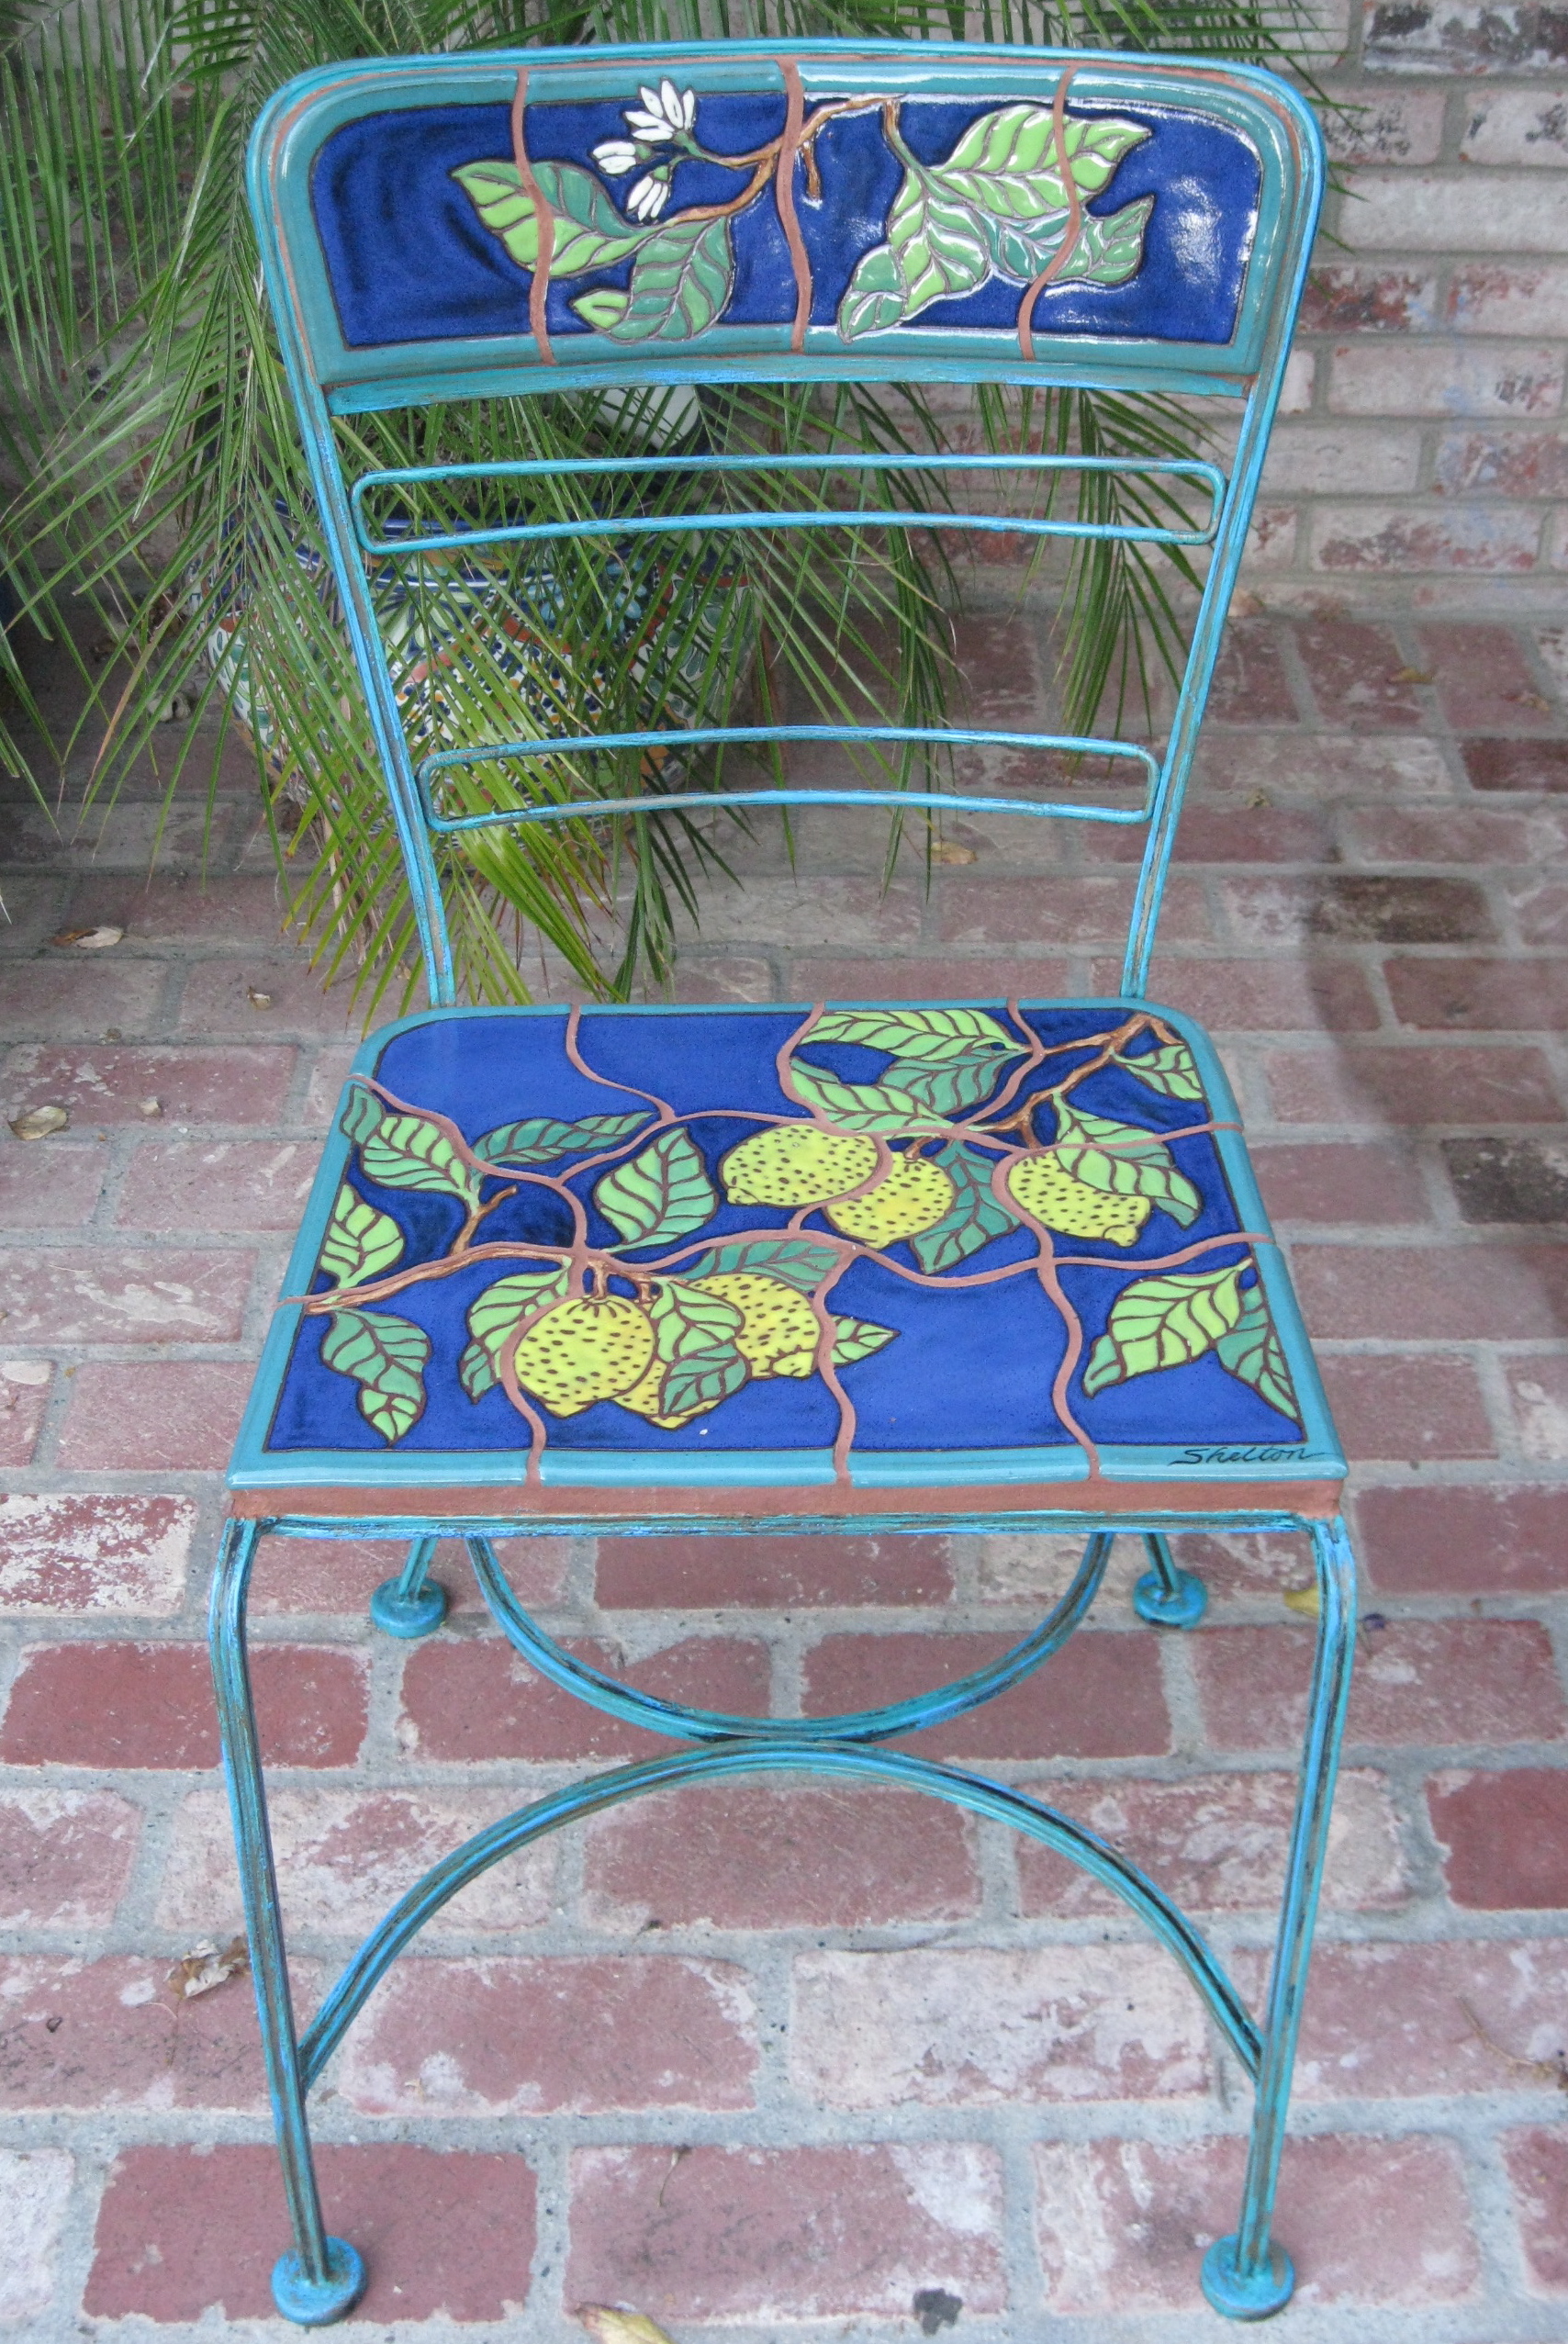 Colorful Ceramic Chair with Lemon Design